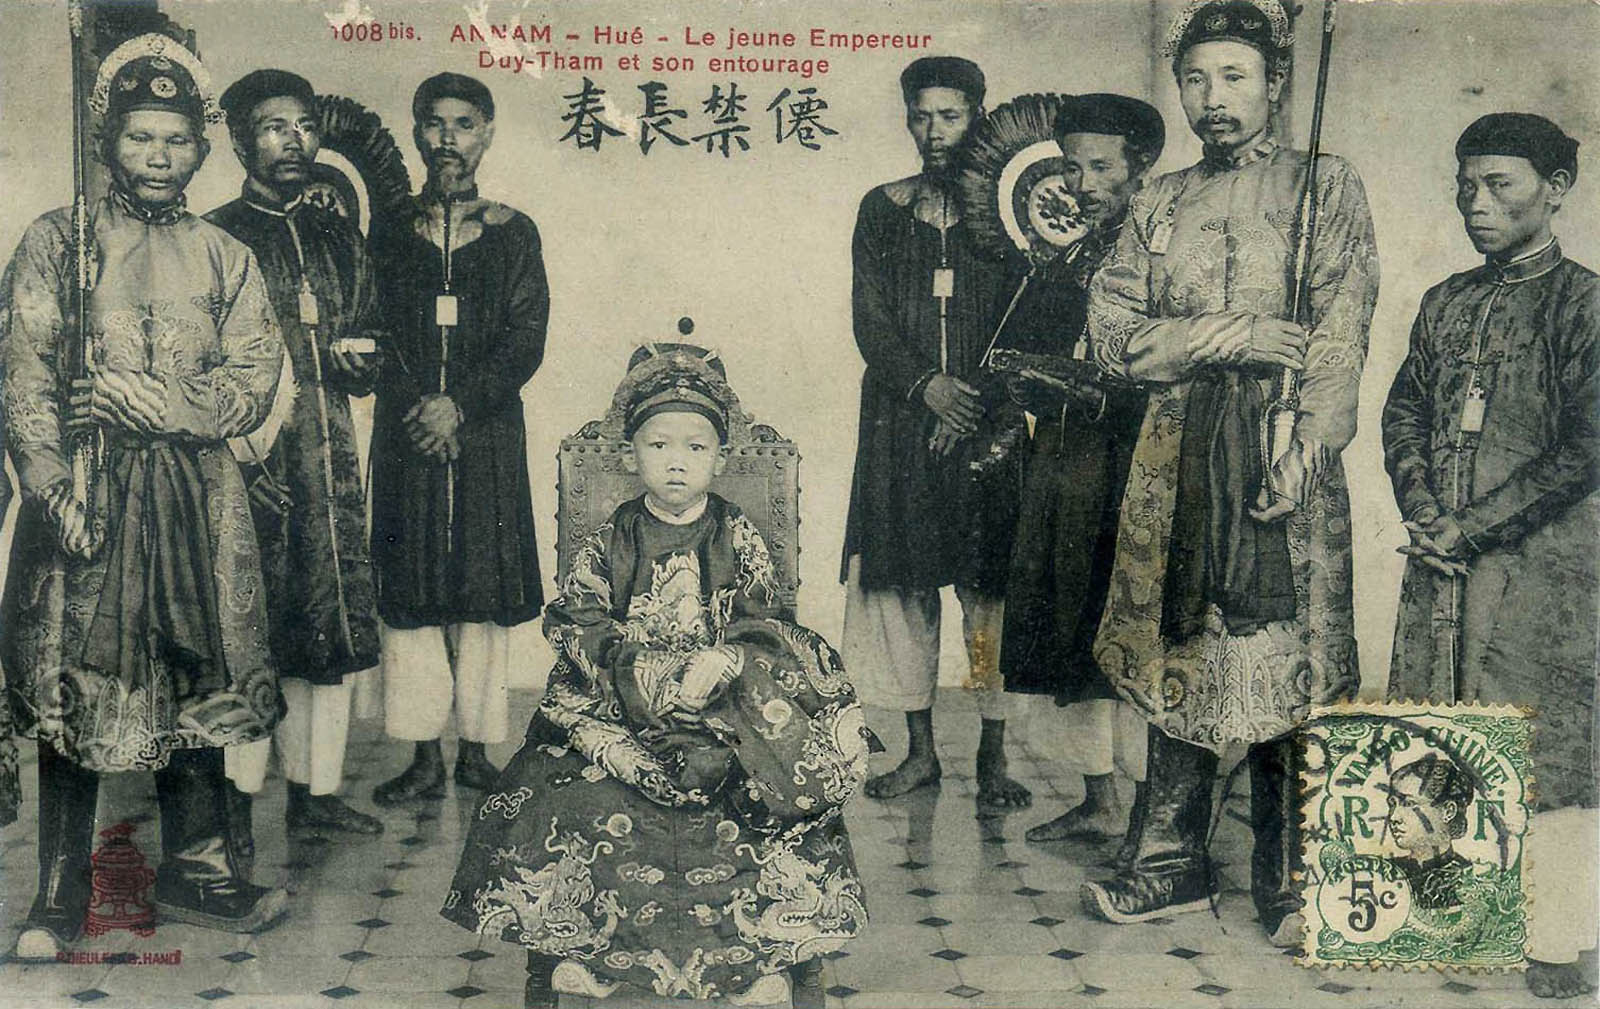 King Duy Tan was the youngest king to ascend the throne, but he had progressive ideas.